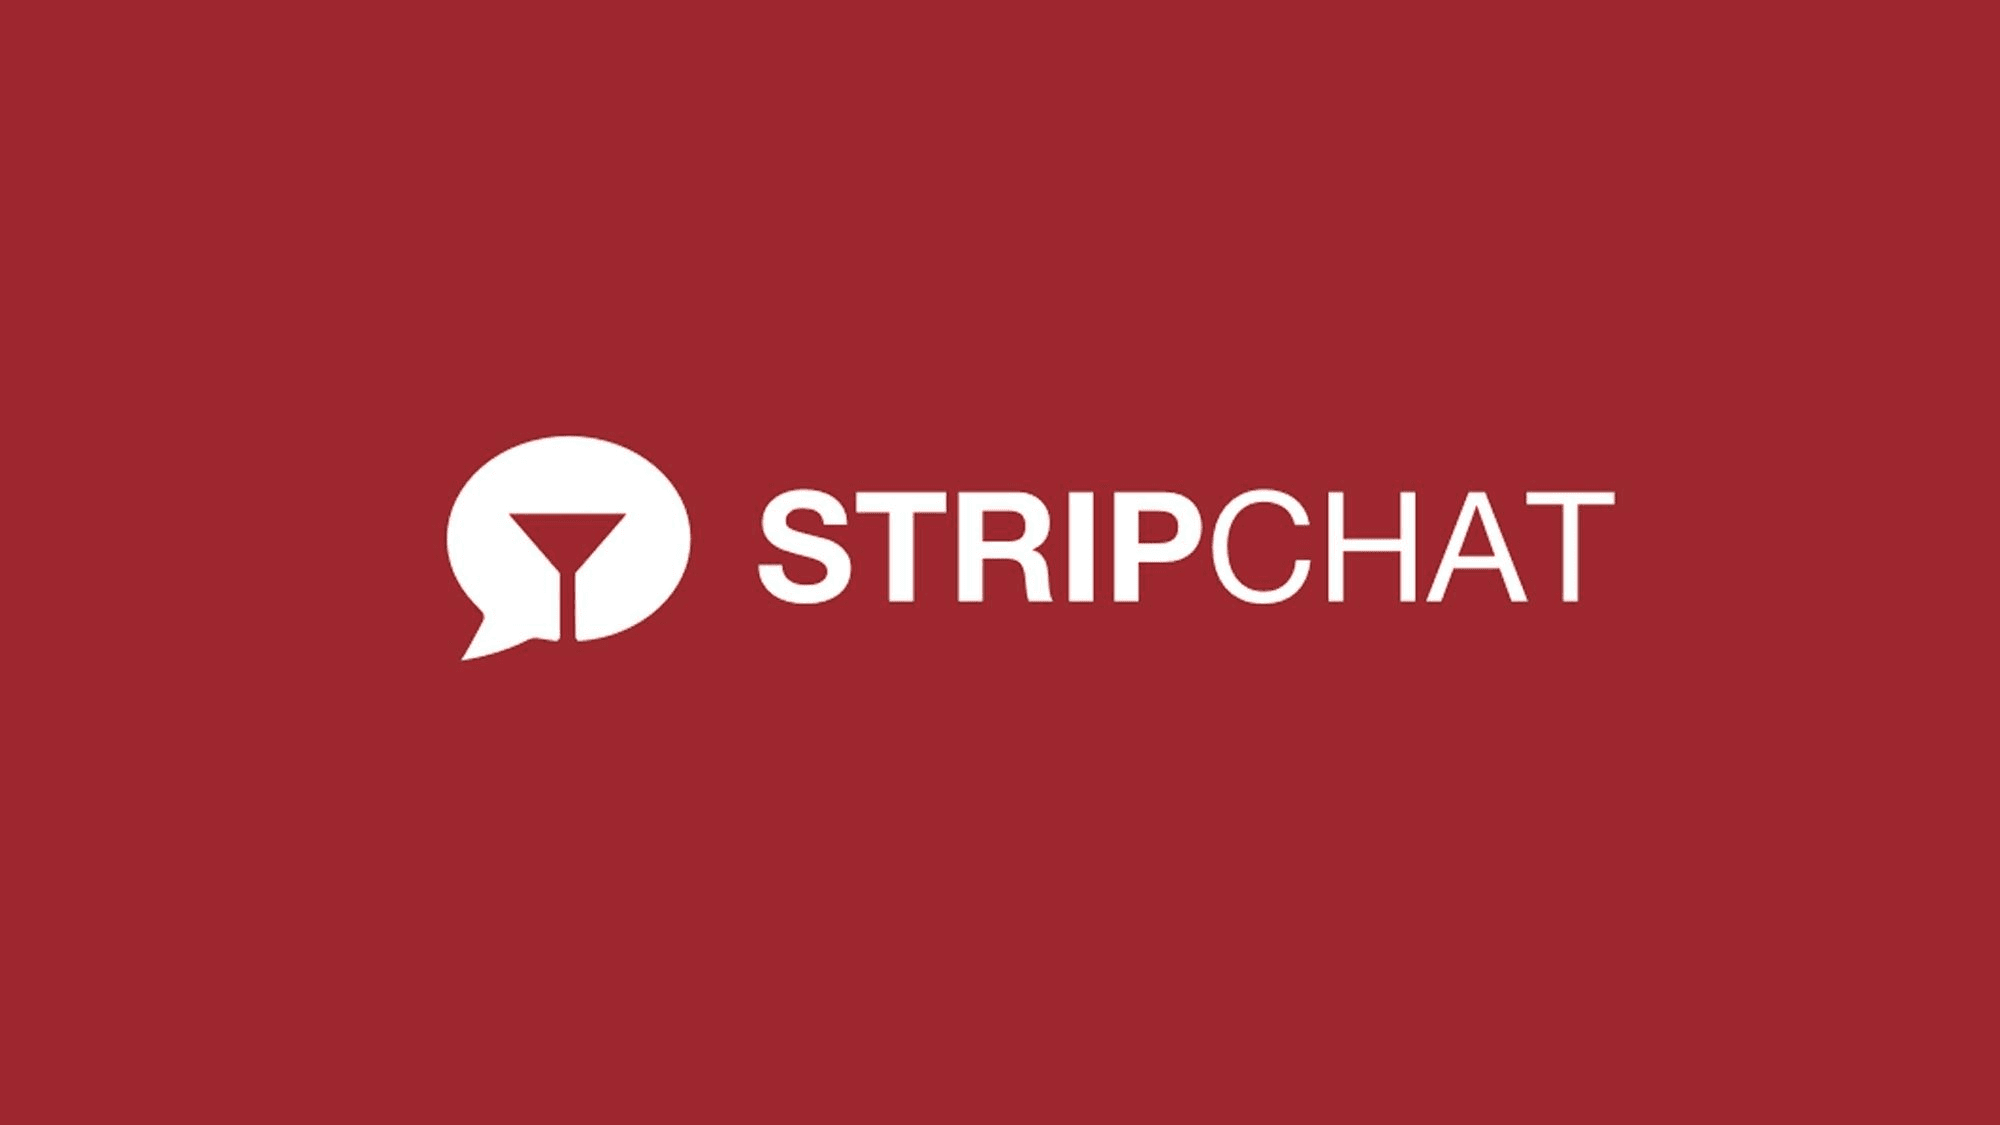 stripchat-free-tokens-2022-free-token-hack-hf3-collection-opensea